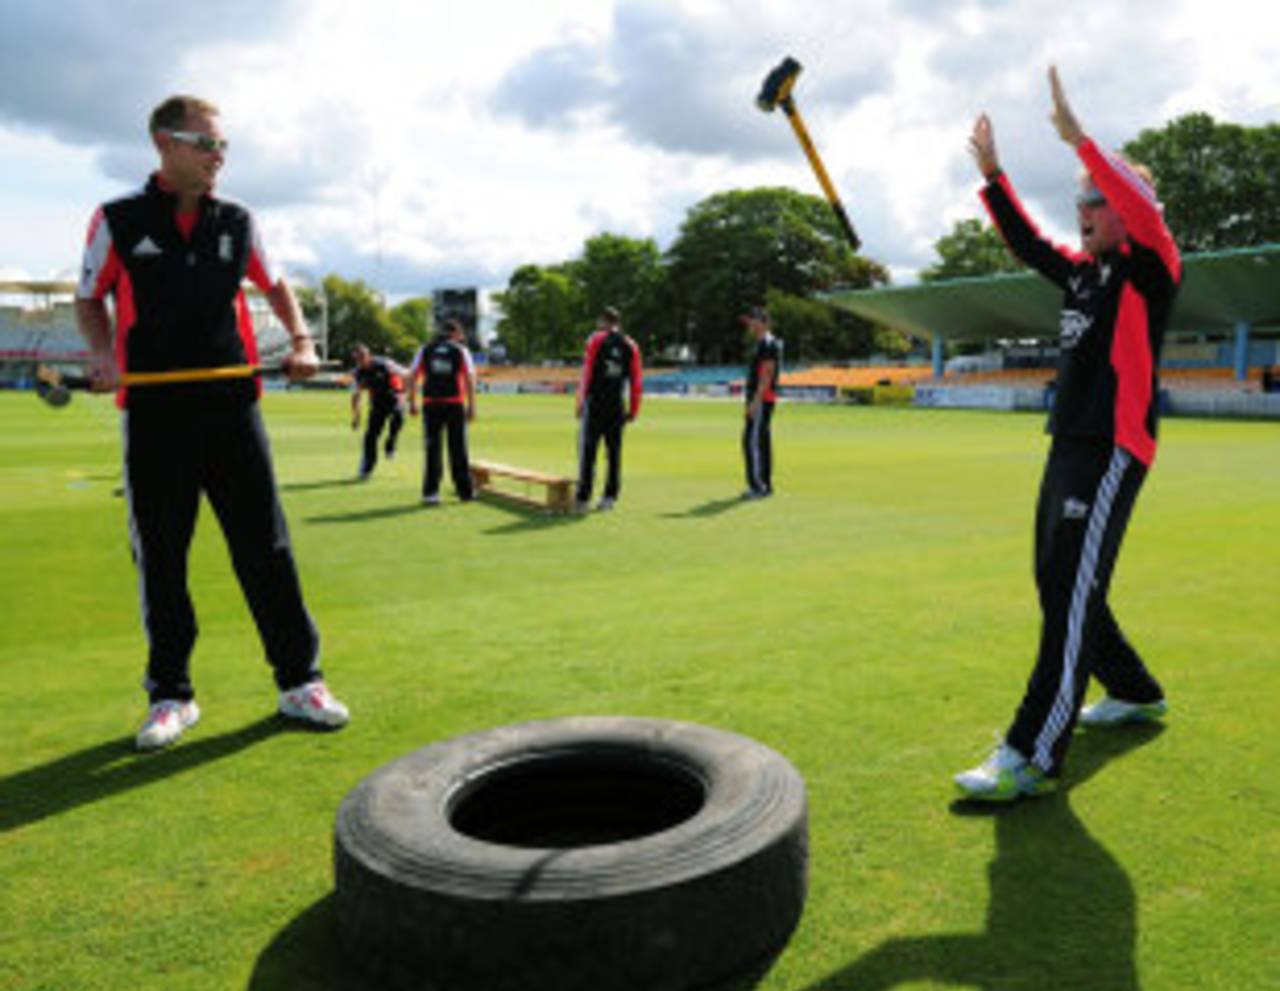 Stuart Broad watches as Graeme Swann loses his hammer during a training exercise that includes striking a rubber tyre, Bristol, June 24, 2011